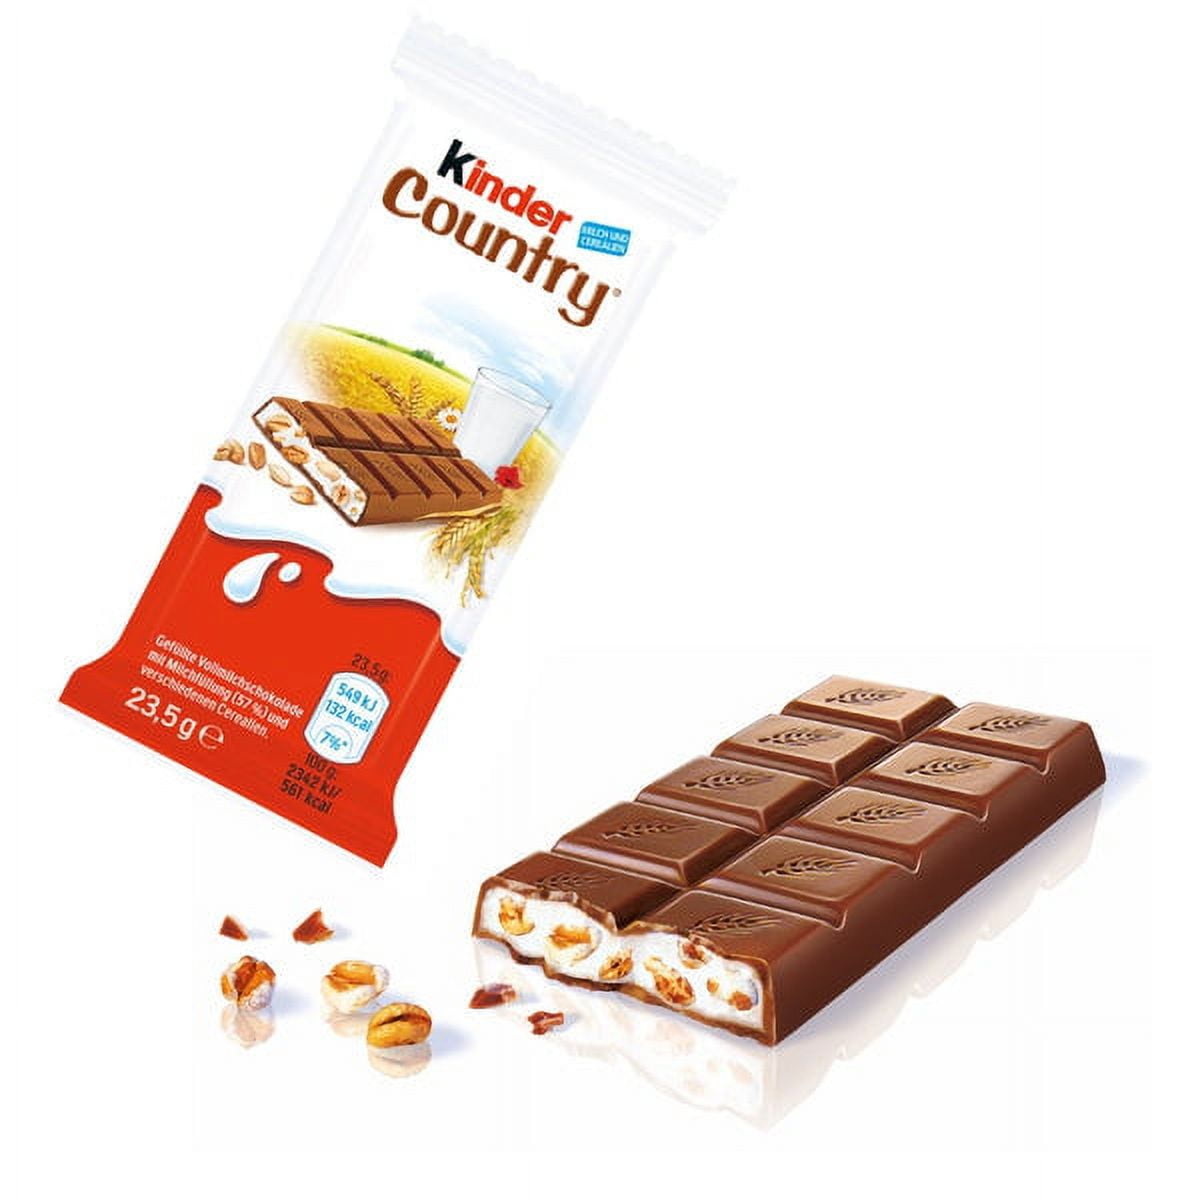 Kinder Country (Pack of 3)